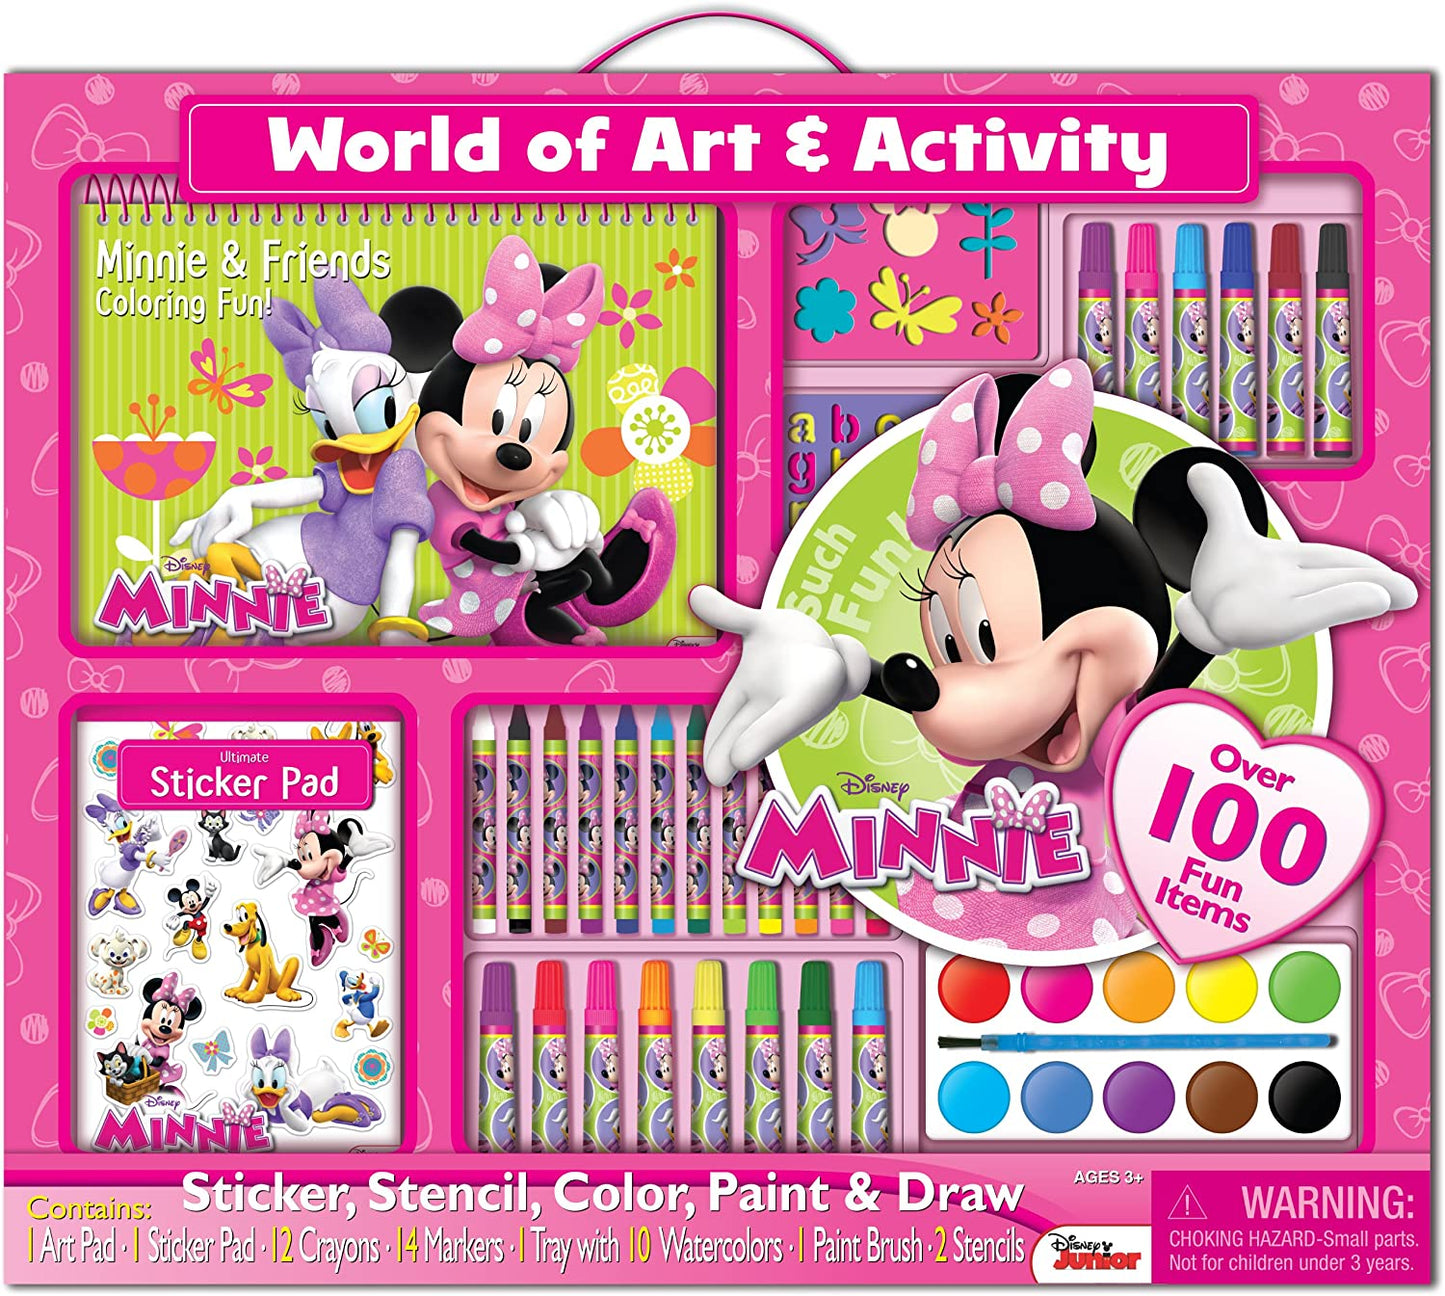 Bendon Disney Minnie Mouse Giant Art Set- Over 100 Minnie Mouse Items Fill With Art And Activity